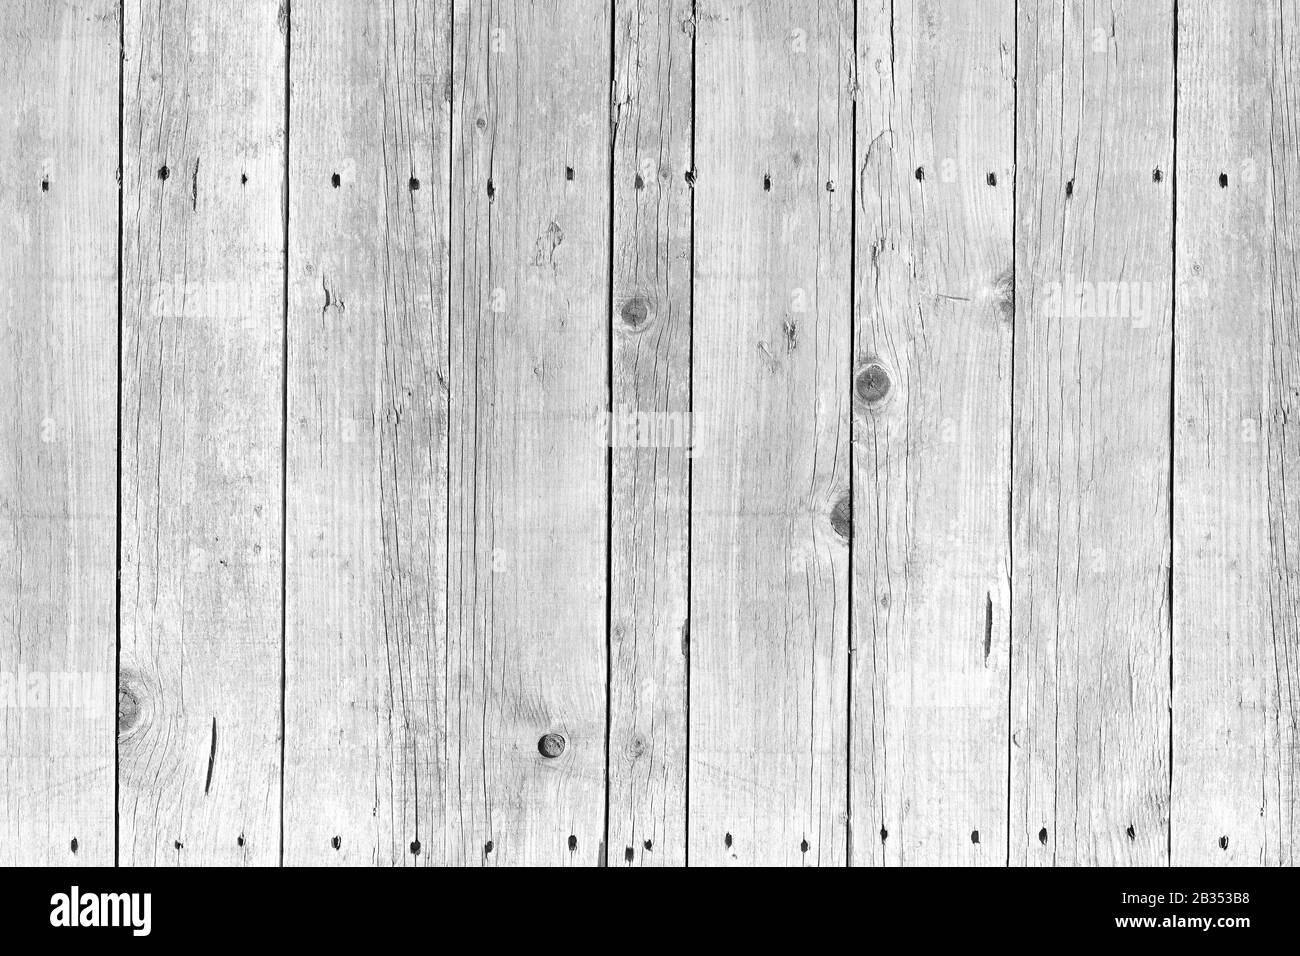 Weathered Pallet - Wooden Texture Background: tabletop view of  nailed up and weathered wooden pallet boards Stock Photo